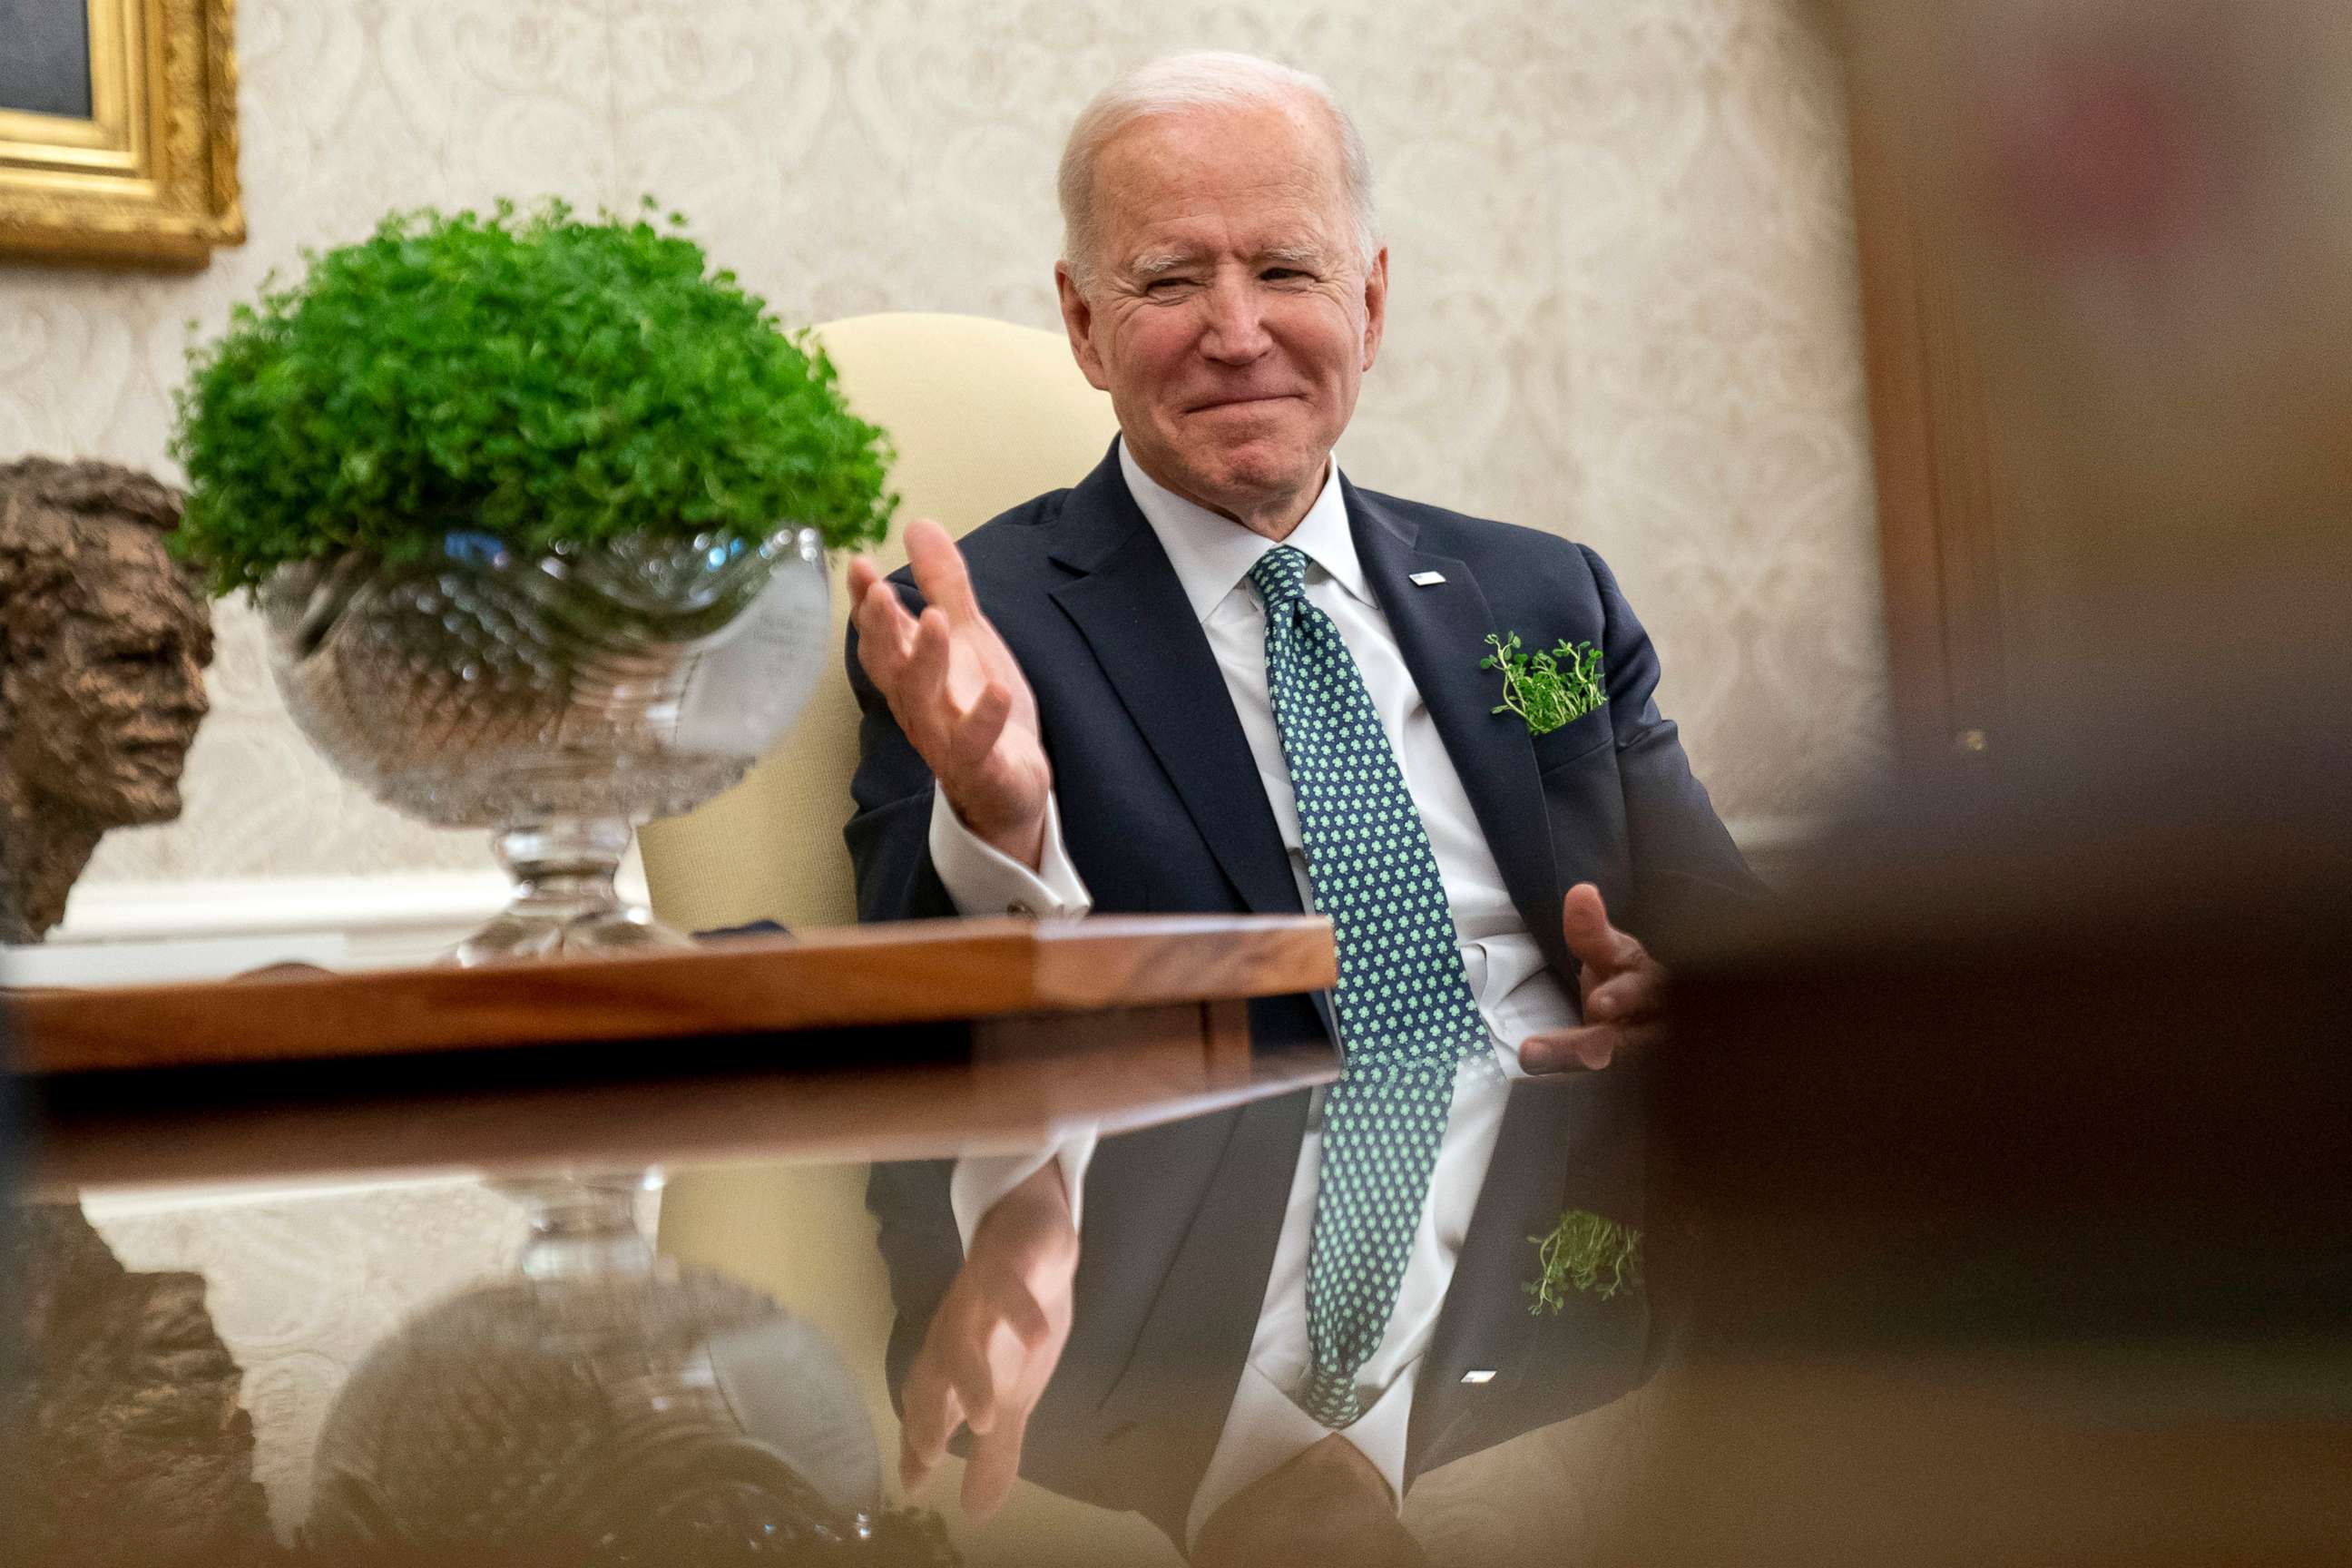 PHOTO: President Joe Biden sits next to a bowl of Irish shamrocks as he has a virtual meeting with Ireland's Prime Minister Micheal Martin on St. Patrick's Day, in the Oval Office of the White House, March 17, 2021.